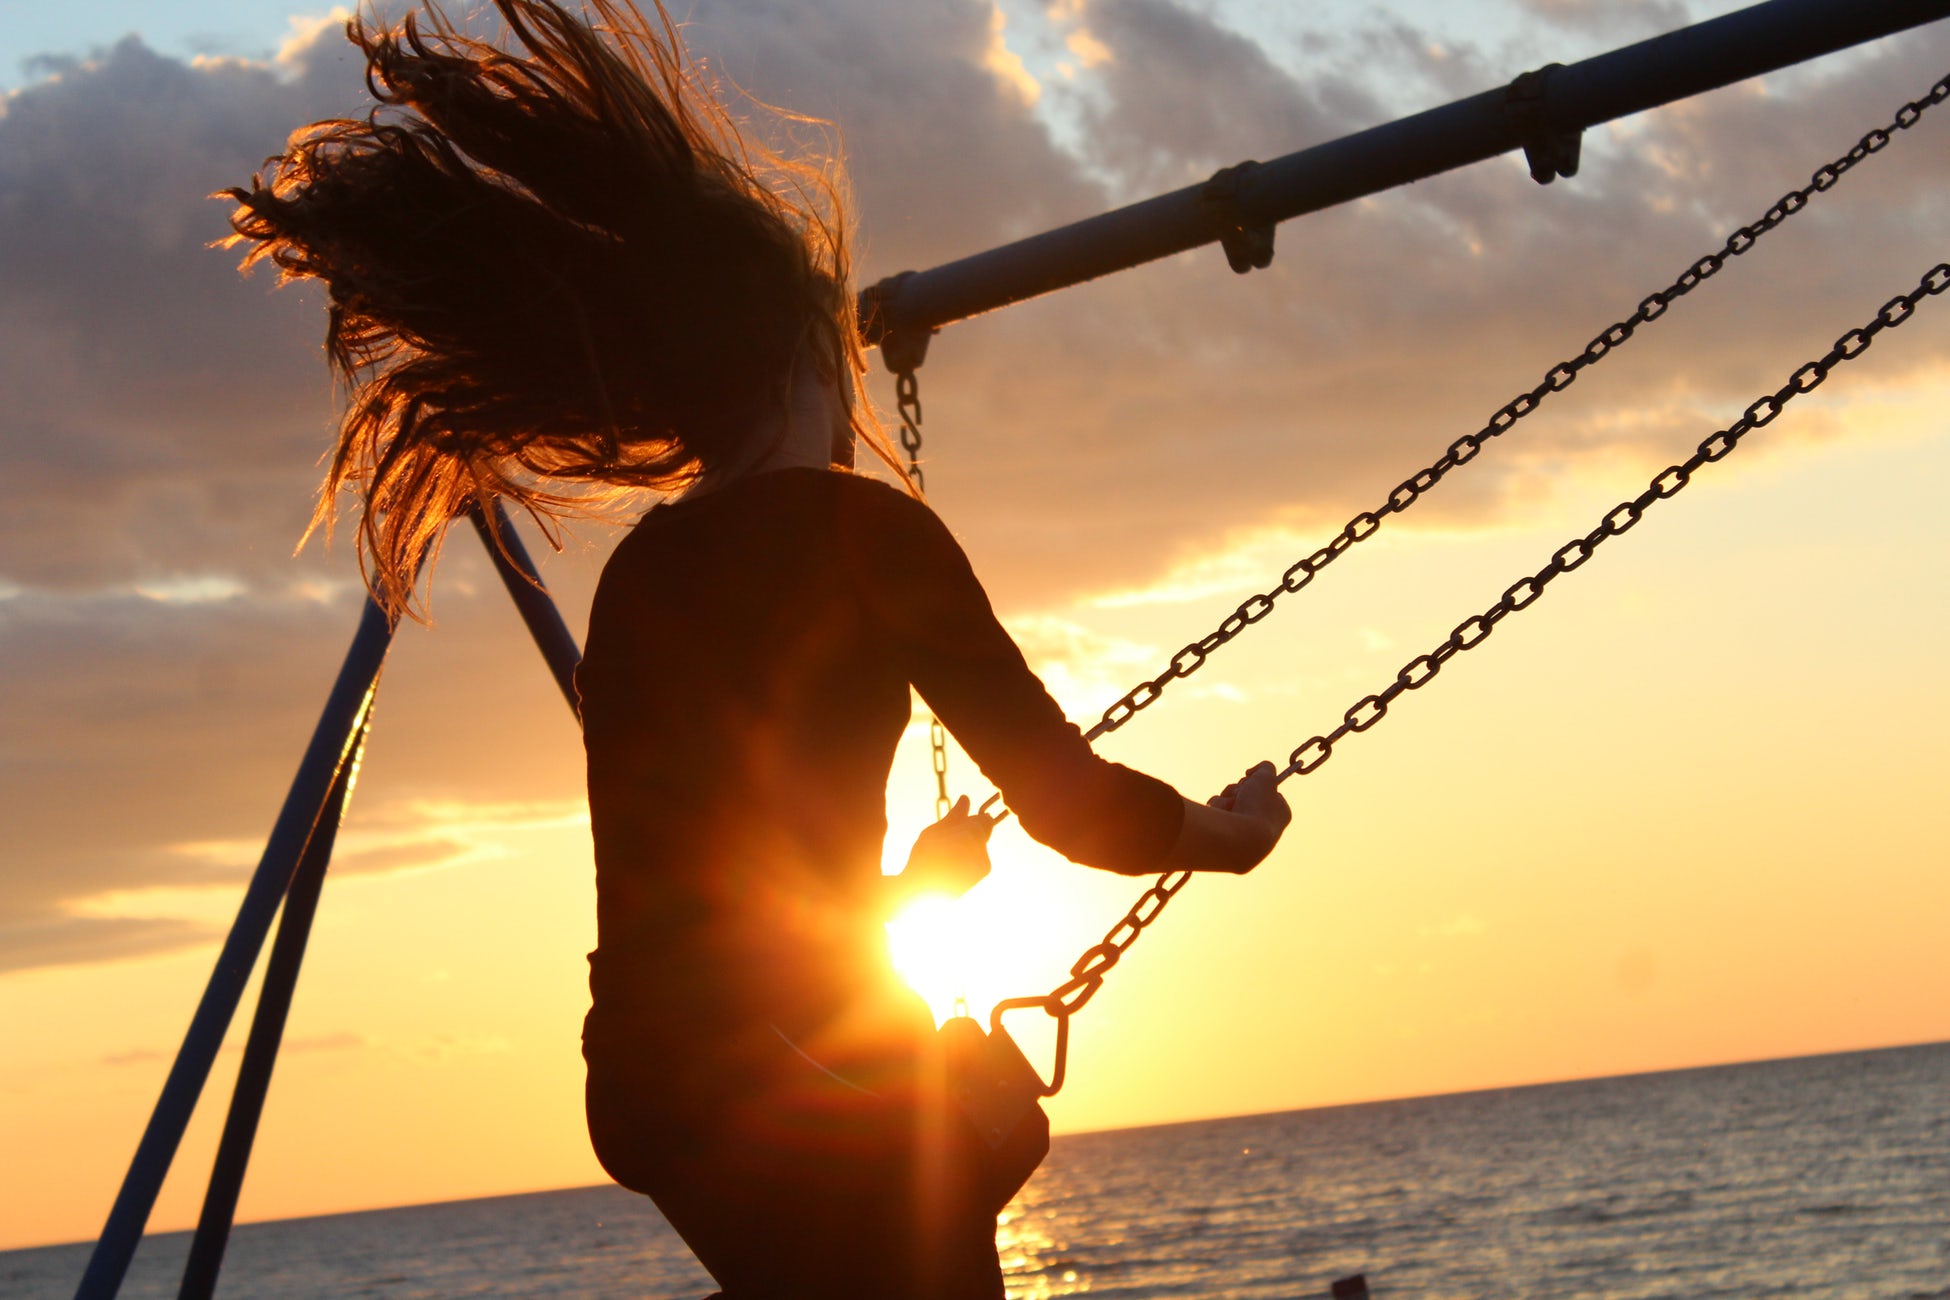 image: Woman swinging on a swing at sunset